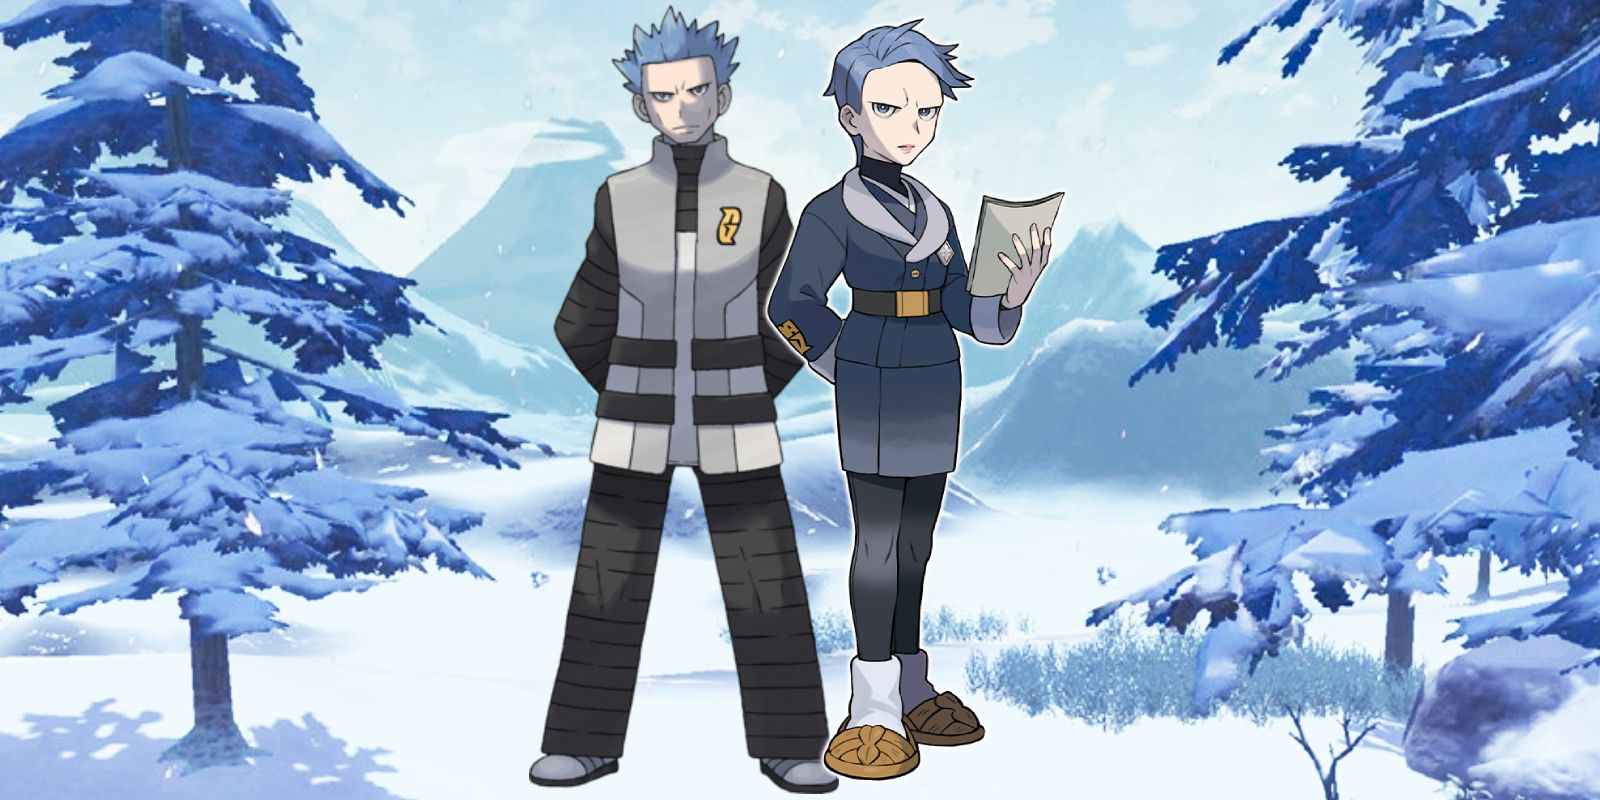 Captain Cyllene and Cyrus from Pokemon standing next to each other